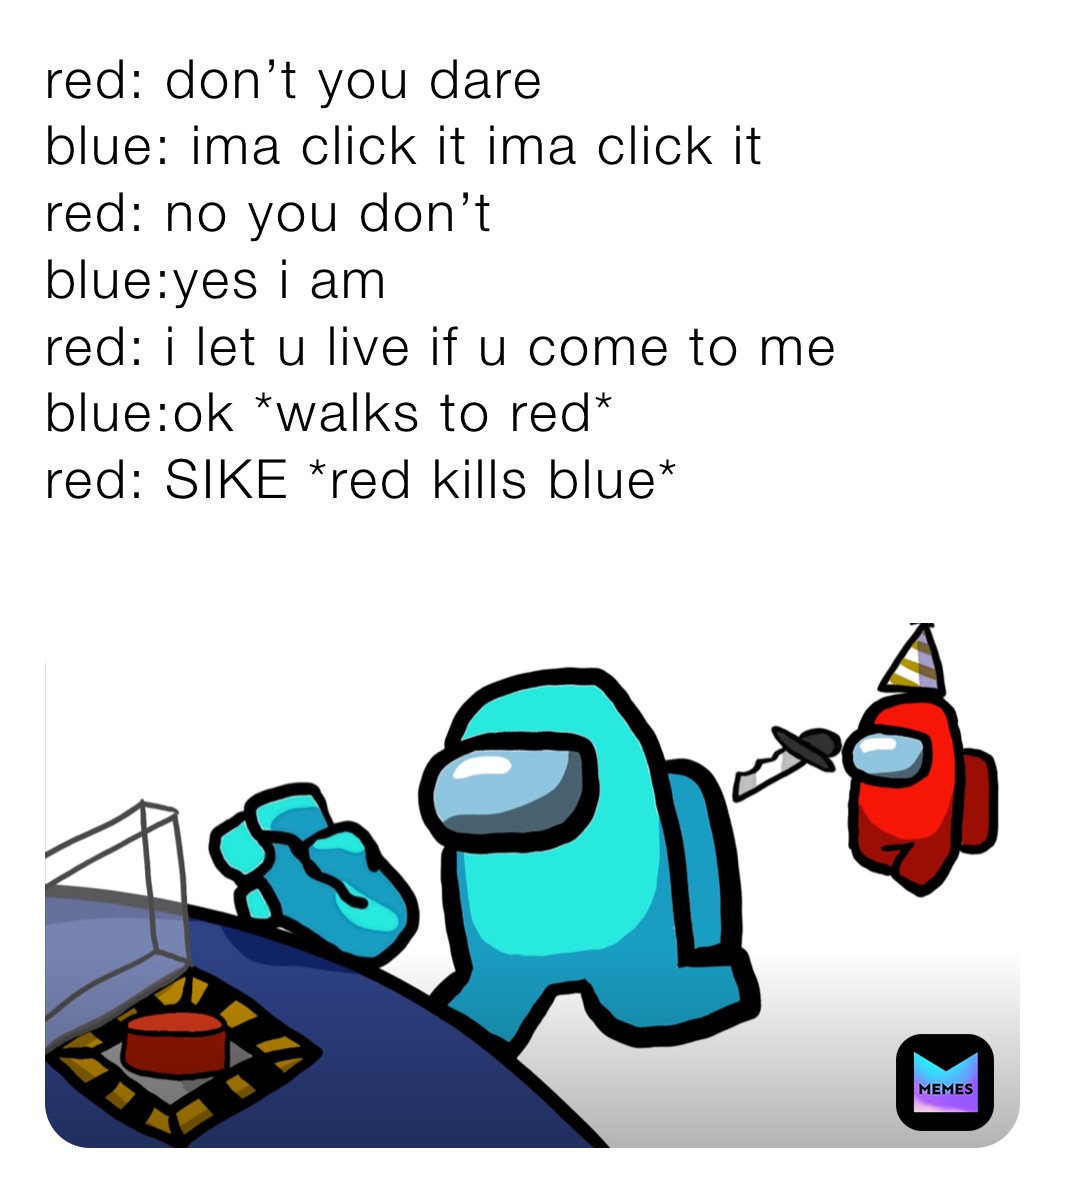 red: don’t you dare
blue: ima click it ima click it
red: no you don’t 
blue:yes i am 
red: i let u live if u come to me
blue:ok *walks to red*
red: SIKE *red kills blue*
